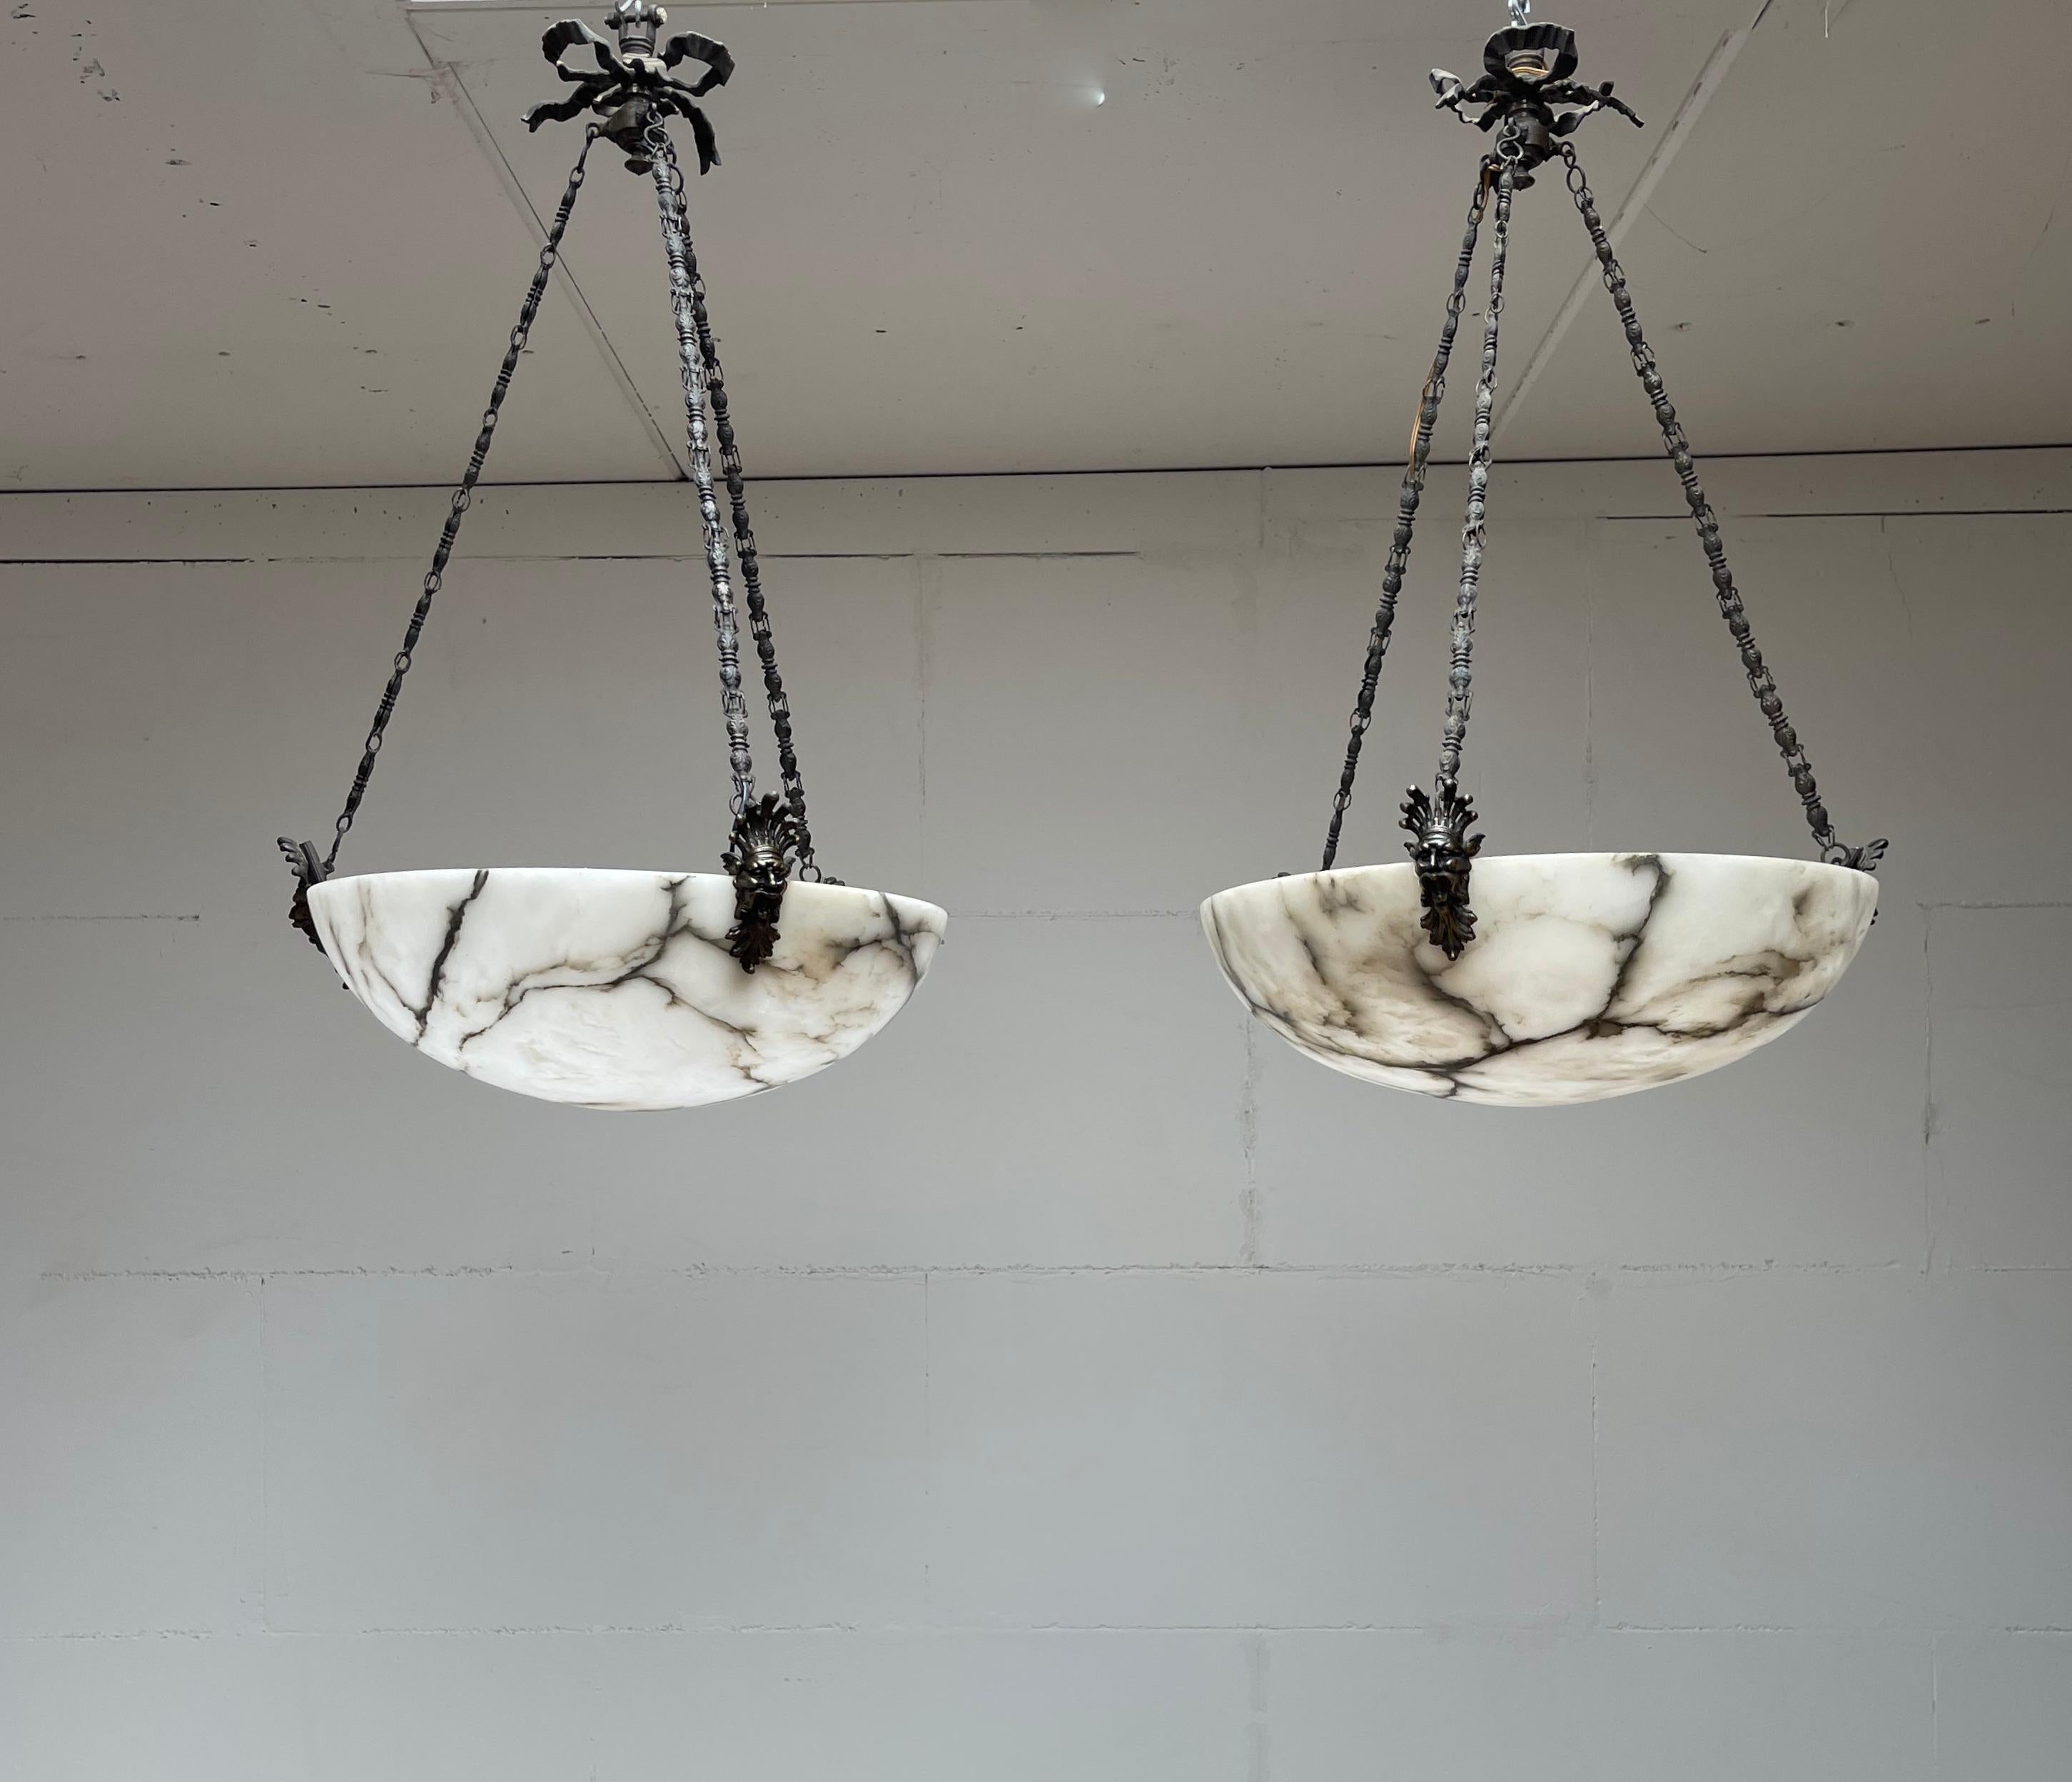 Extremely rare set of hand carved, early 1900s alabaster chandeliers.

If you have been looking for the ideal pair of large and stylish alabaster chandeliers for a project or for your own home then look no further. Via one of our trusted connections